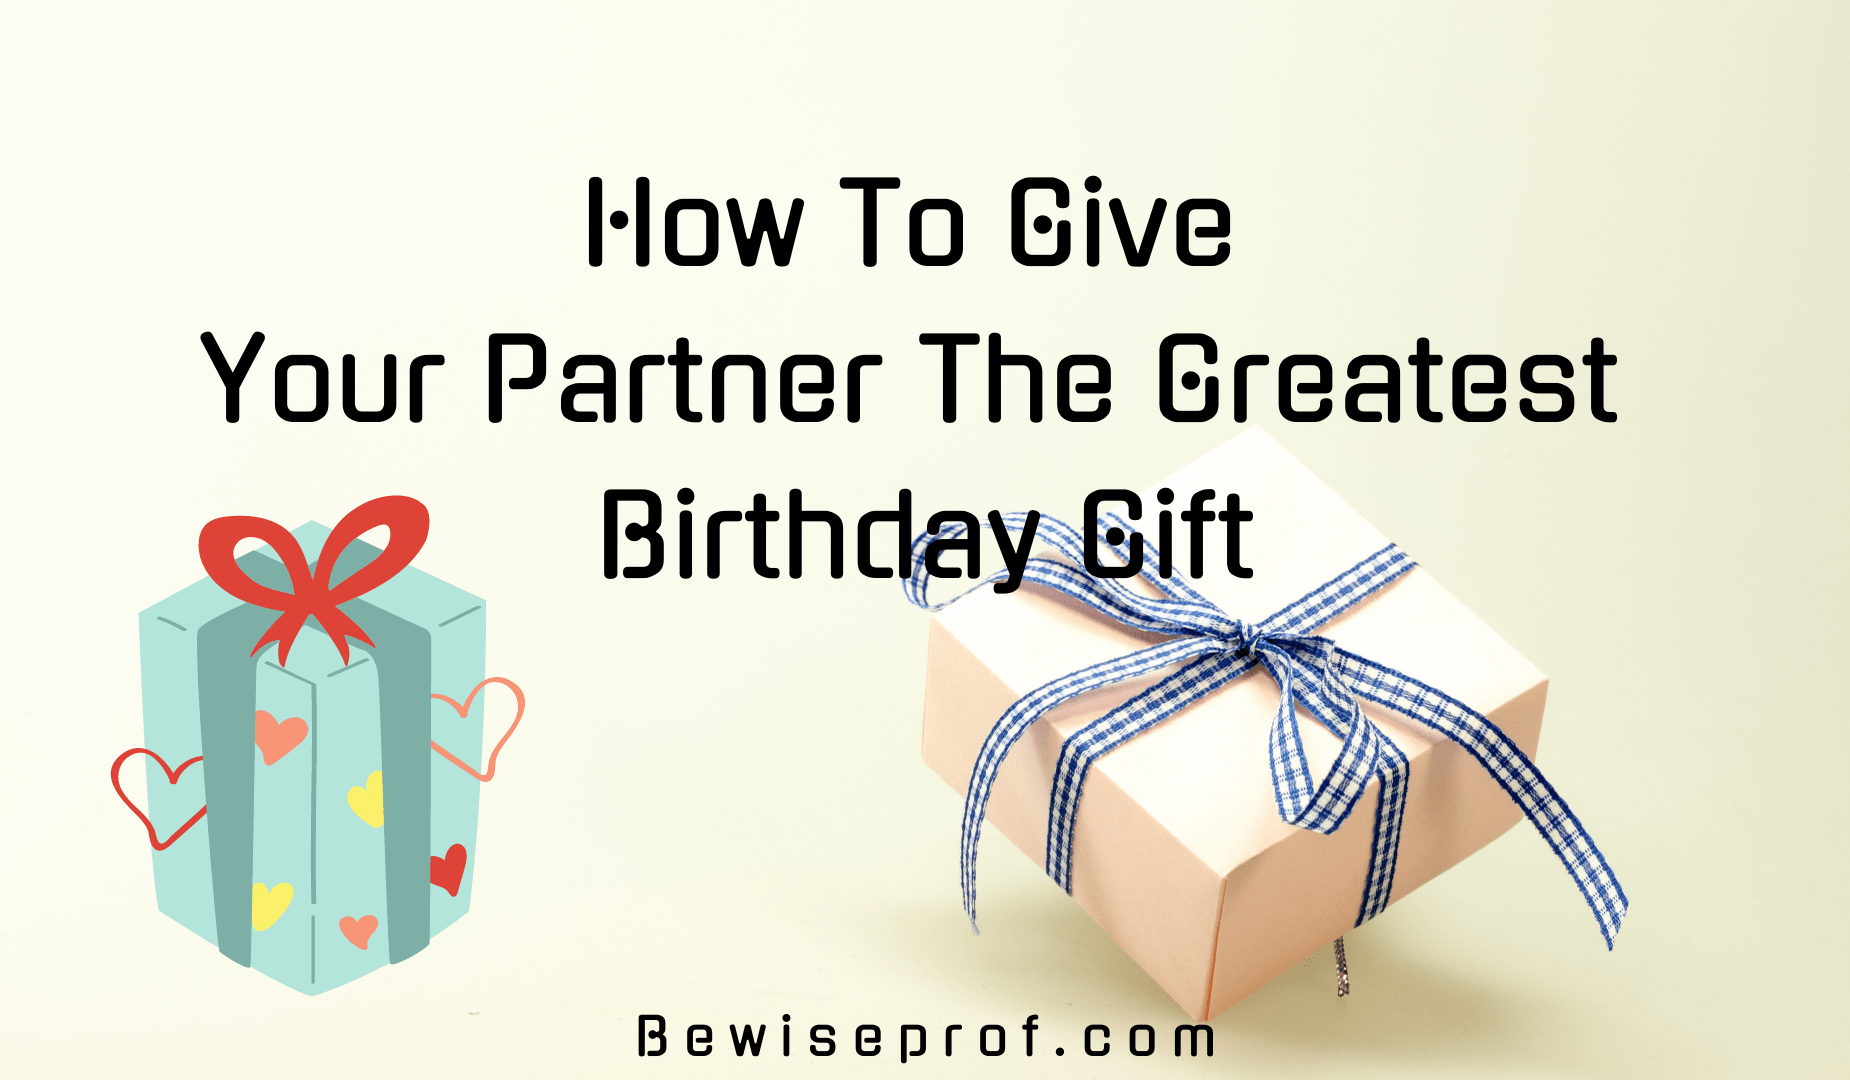 How To Give Your Partner The Greatest Birthday Gift